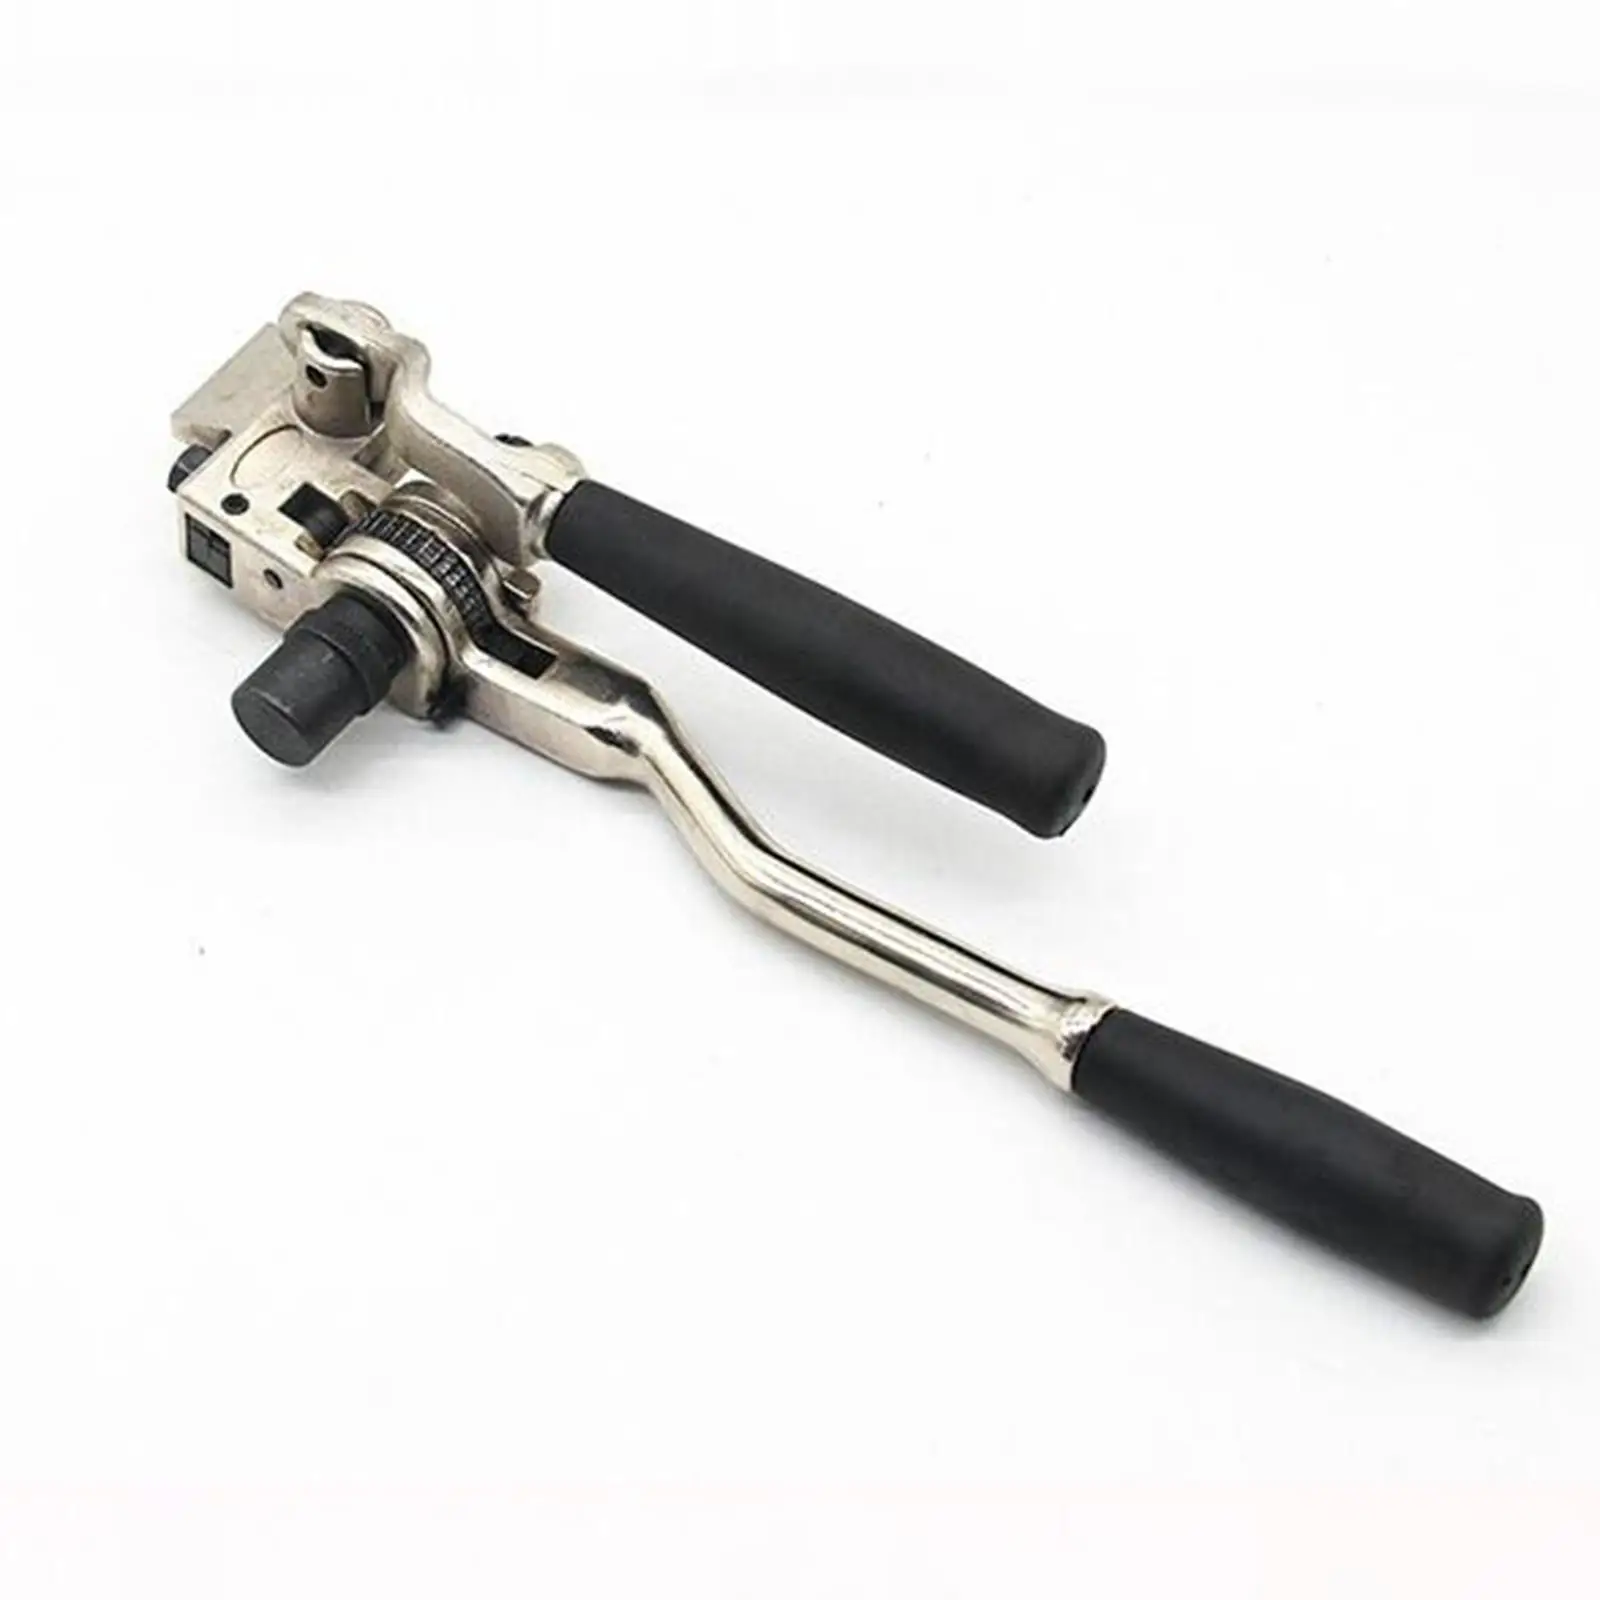 Stainless Steel Band Strapping Plier Heavy Duty Cable Tie Cutter Pliers Hand Tool Banding Tool for Quick Cutting Steel Wire